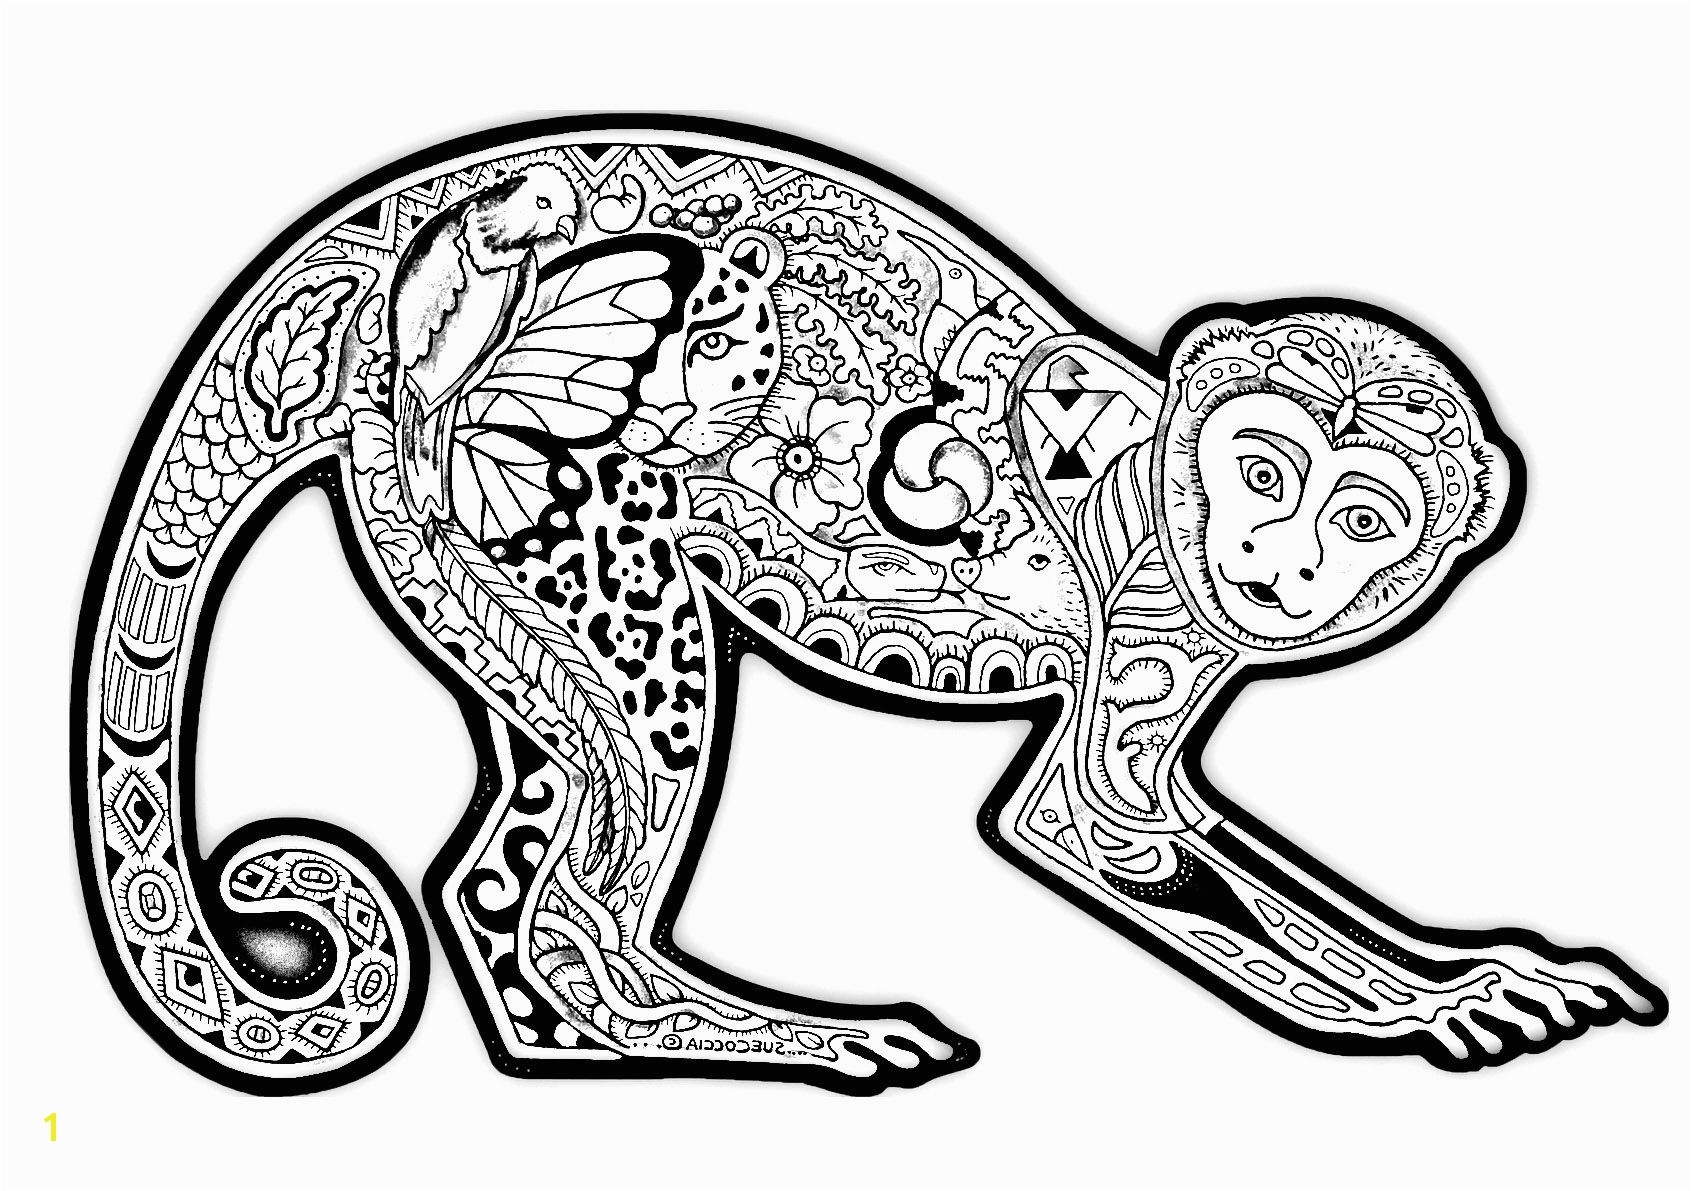 Free coloring page coloring difficult monkey A coloring page with a monkey full of various plant patterns